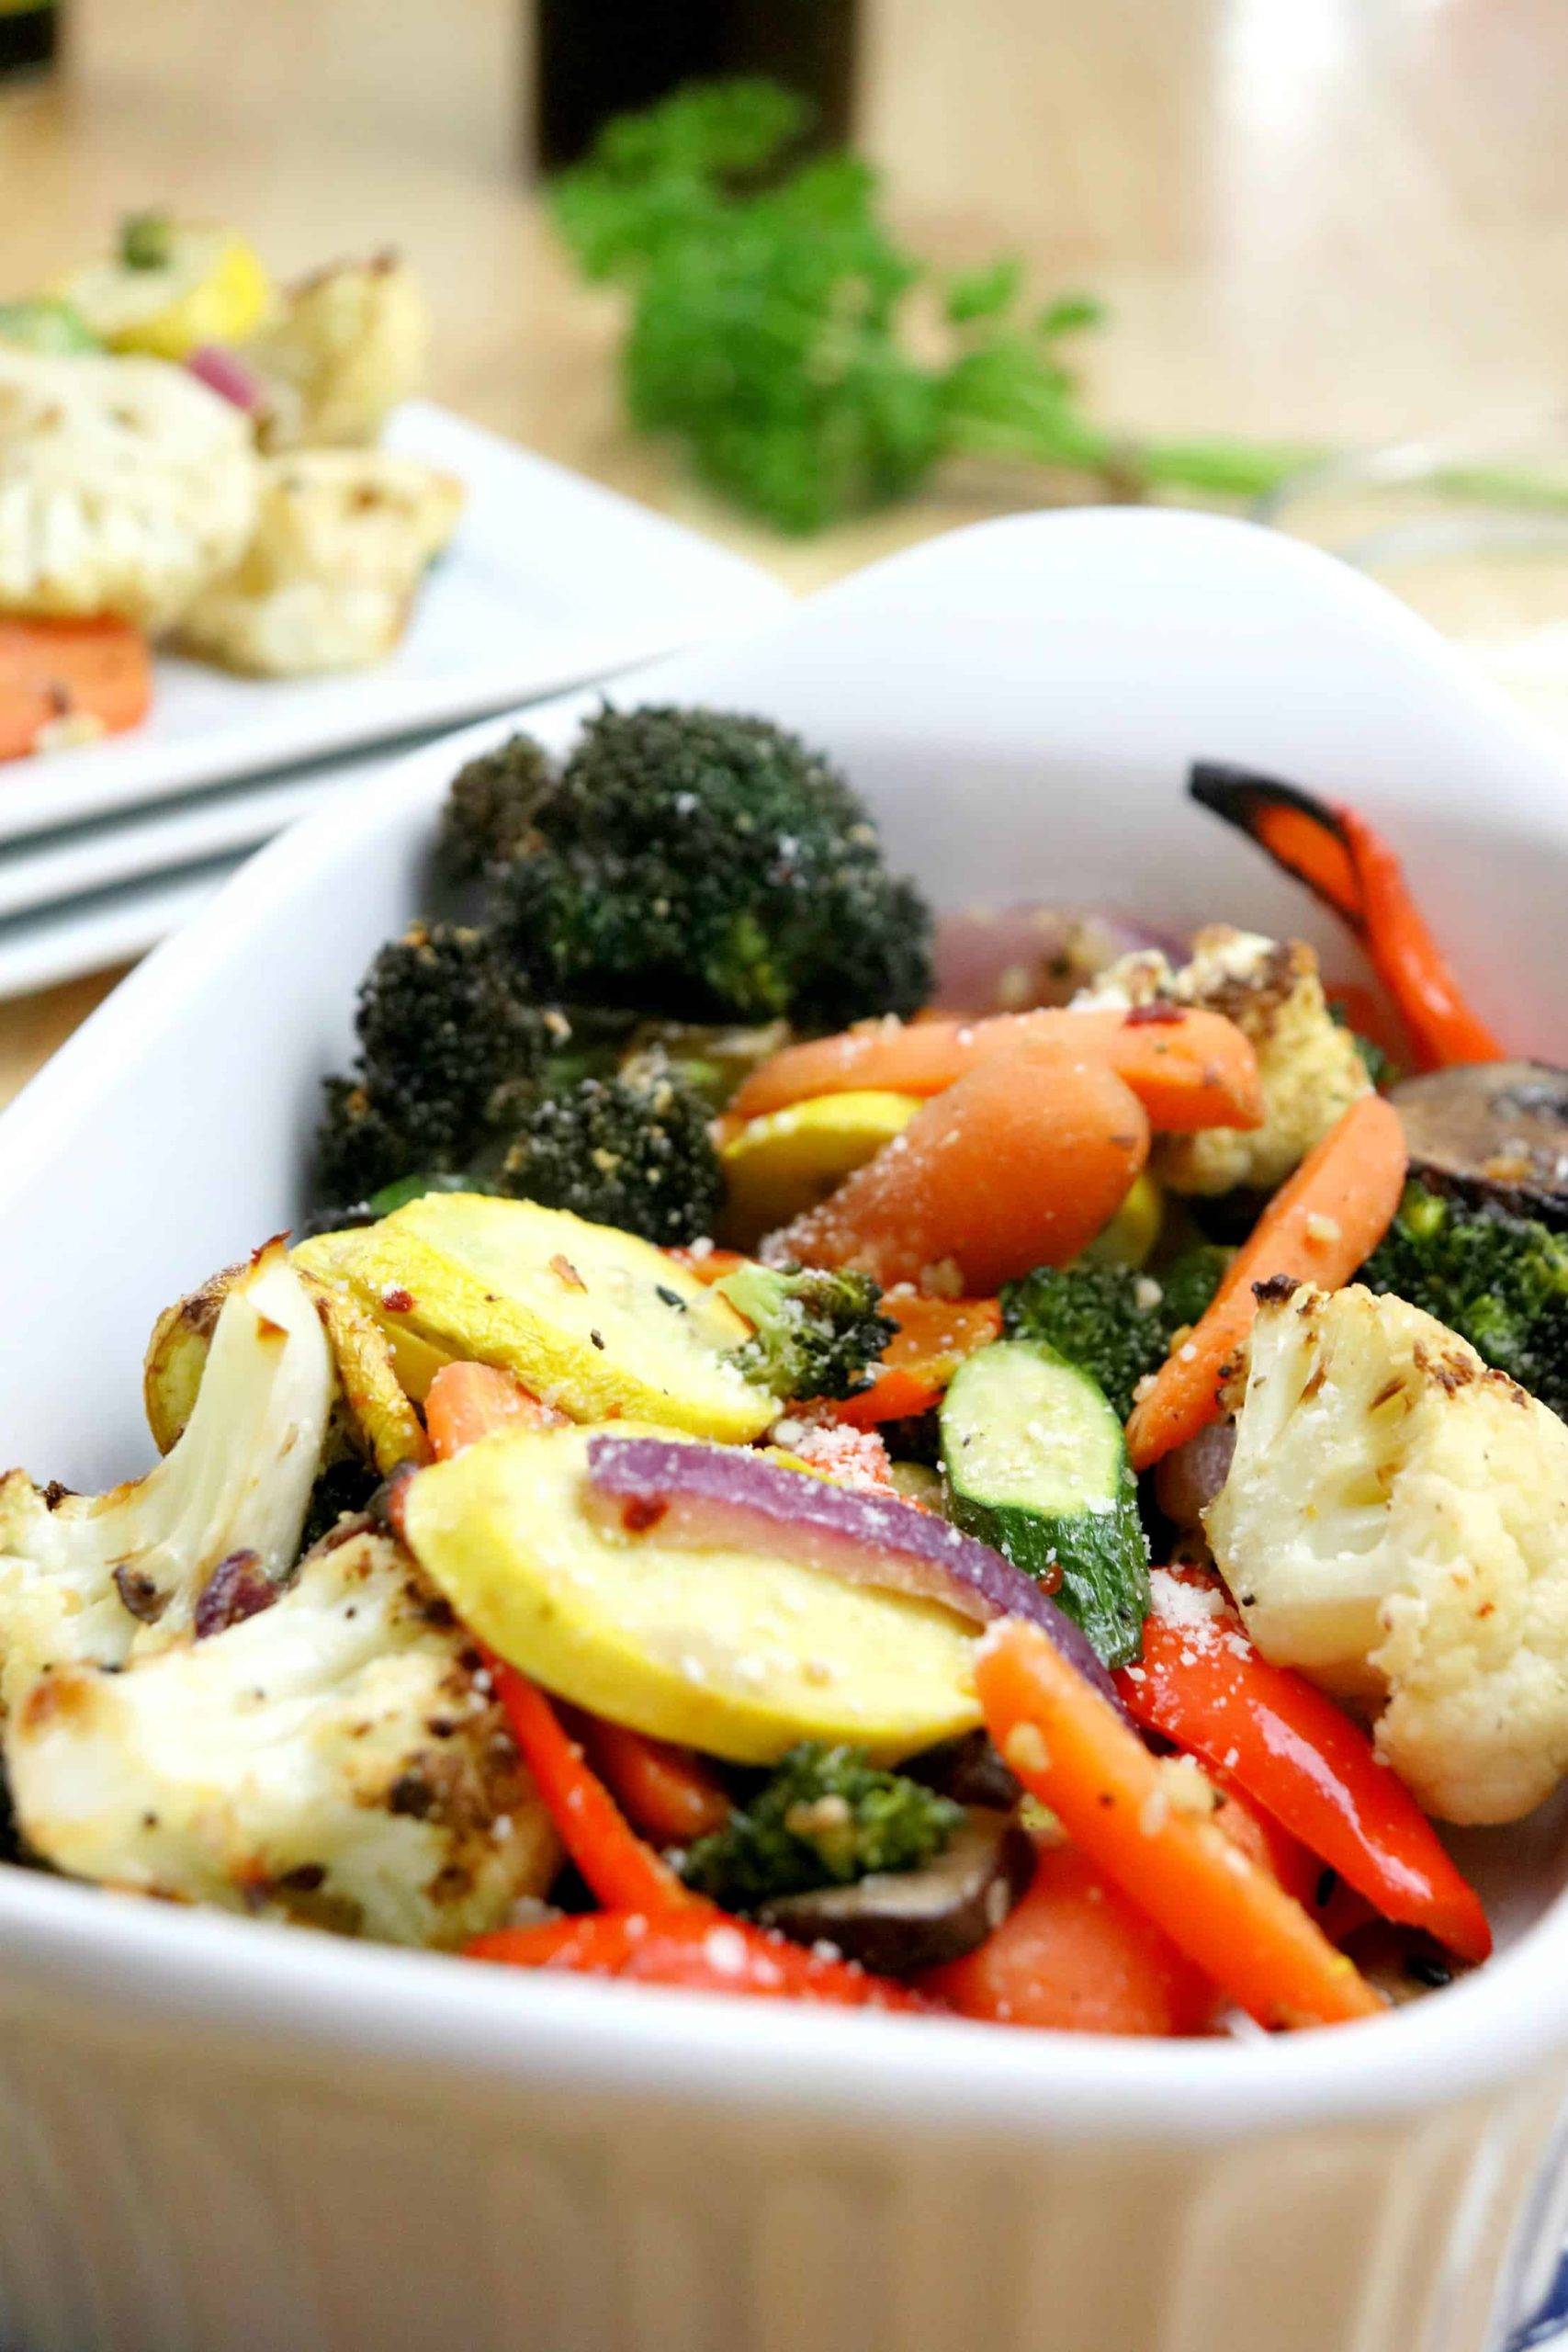 variety of colorful roasted vegetables in white bowl